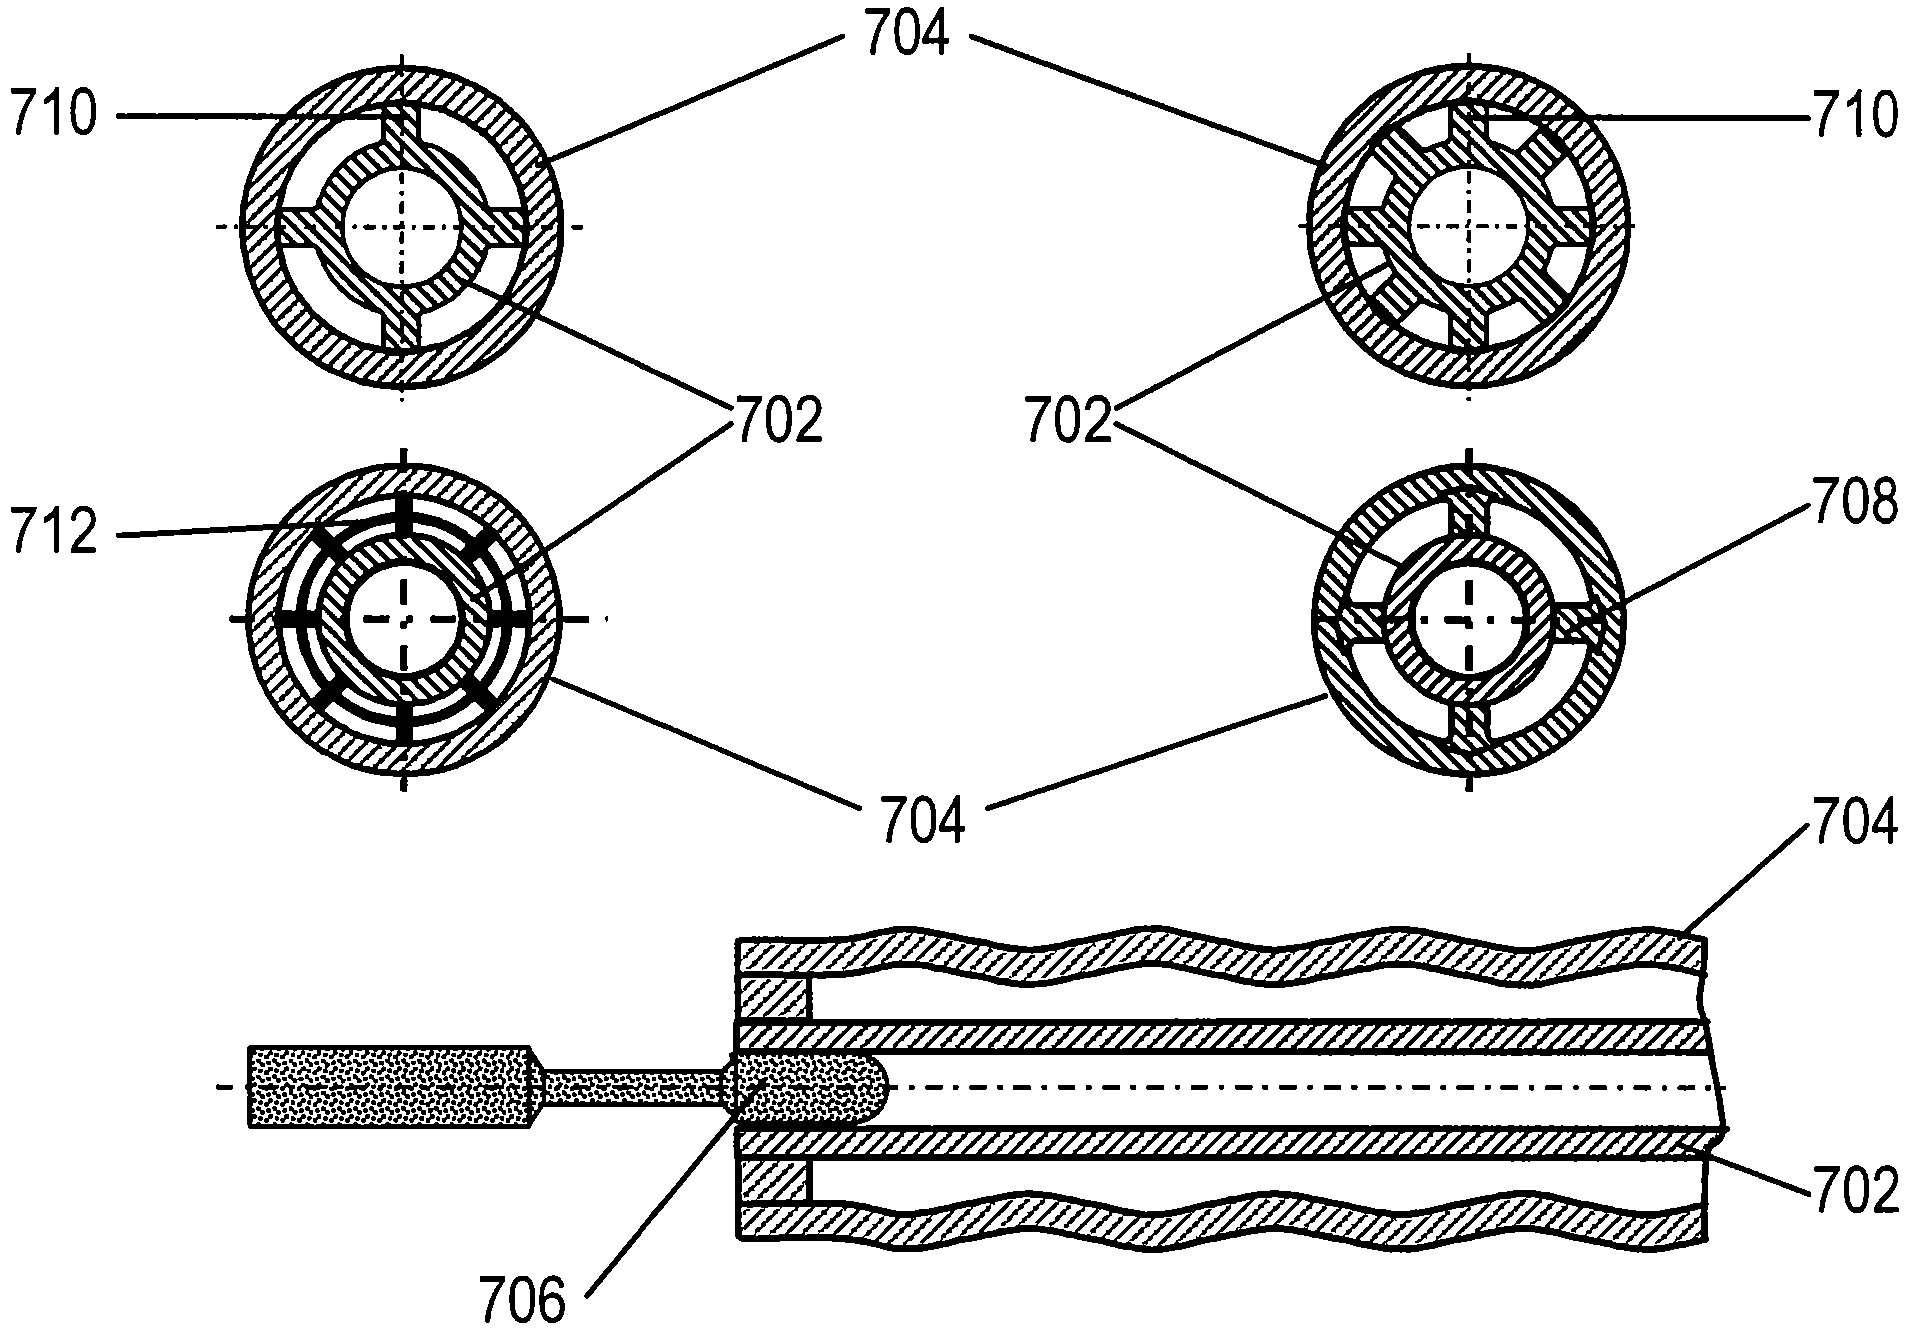 Design of high power pulsed flash lamps